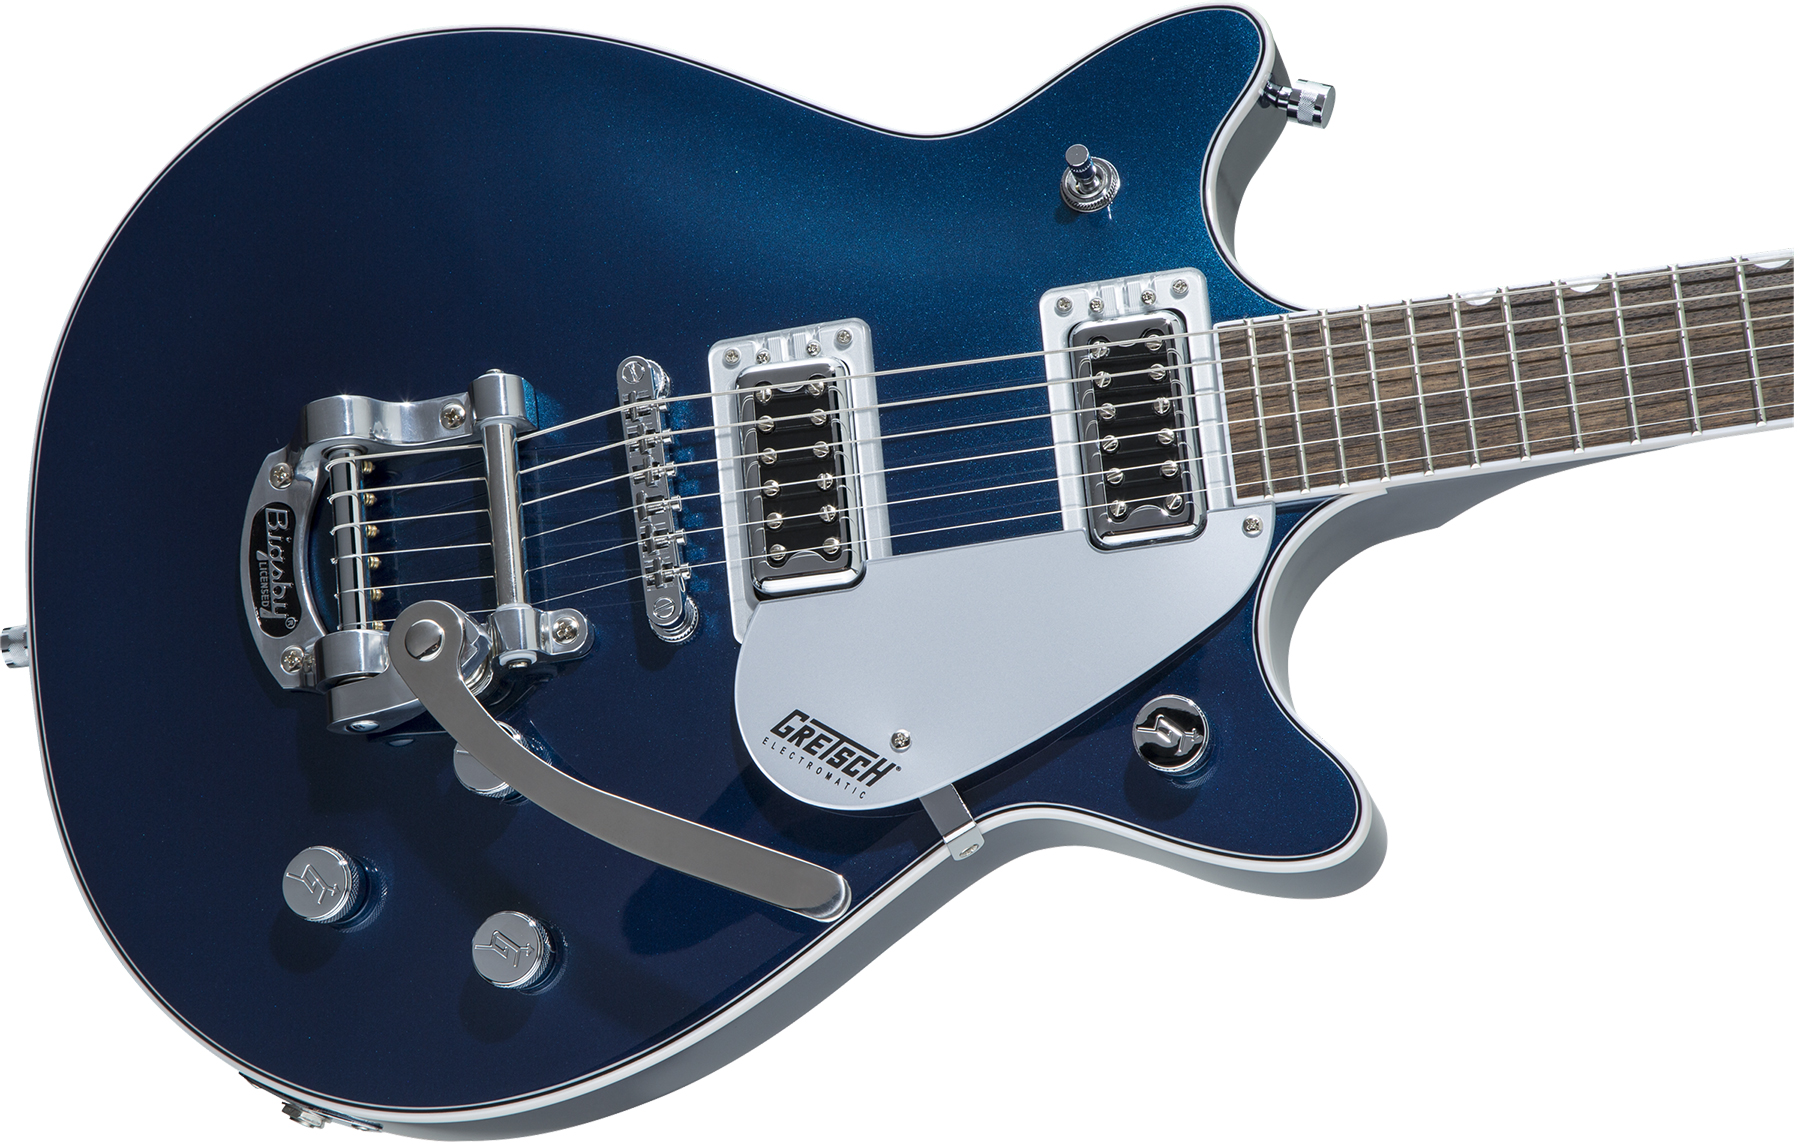 Gretsch G5232t Electromatic Double Jet Ft 2019 Hh Bigsby Lau - Midnight Sapphire - Double cut electric guitar - Variation 2